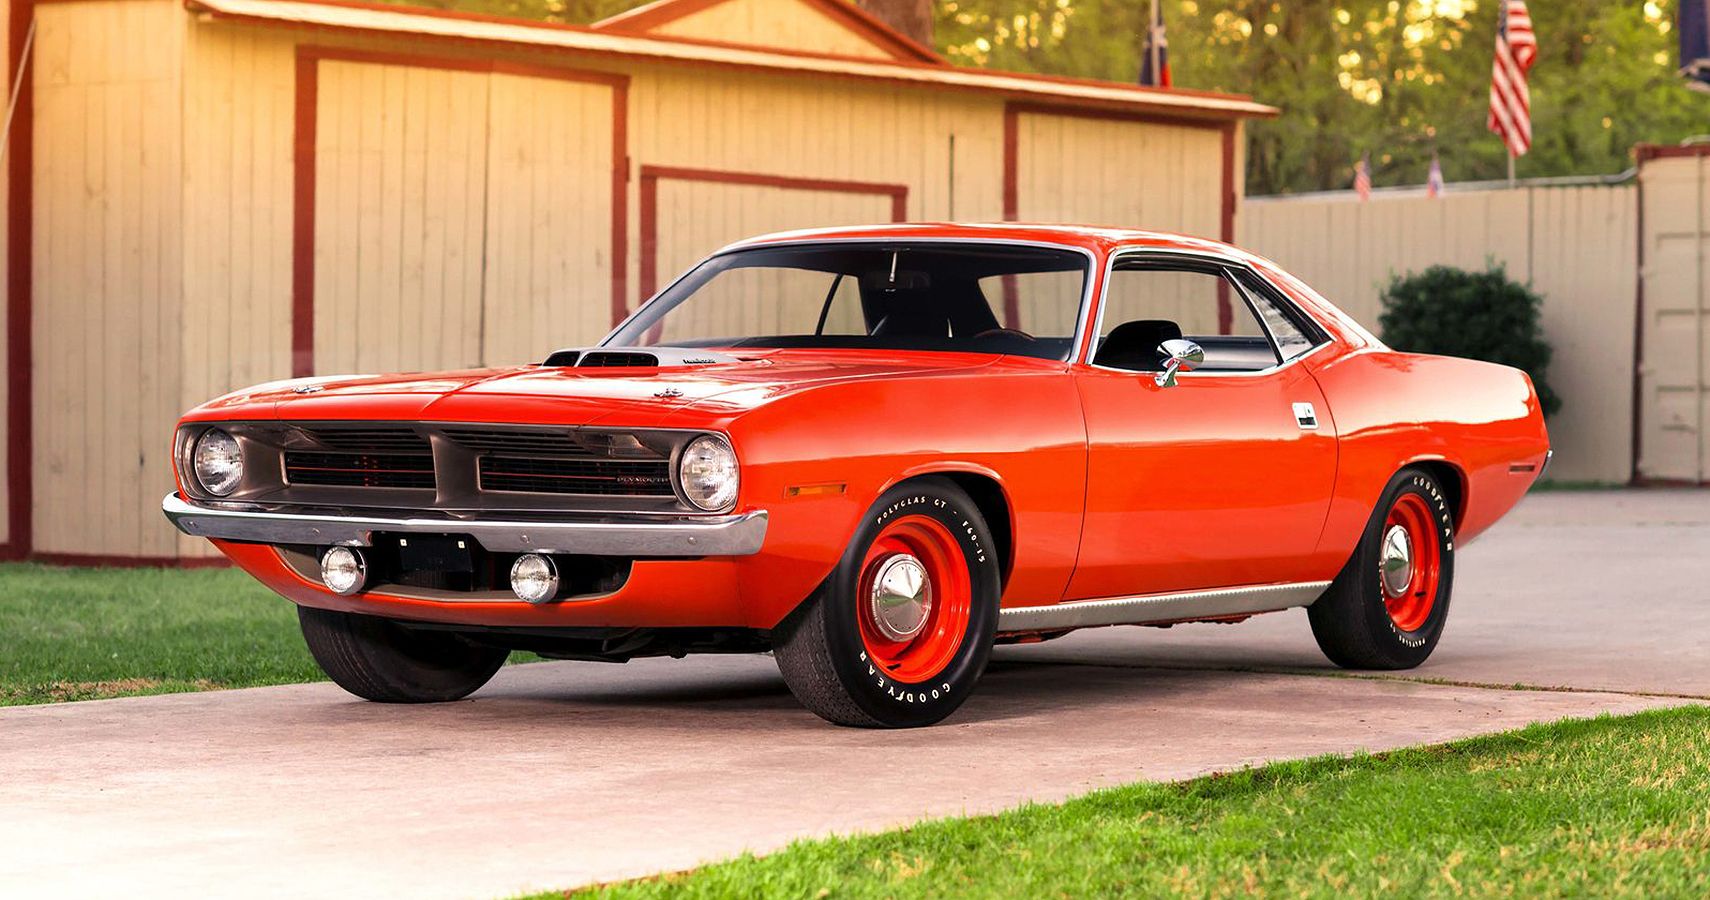 Let’s Power Up: 1970 Plymouth Barracuda Hemi